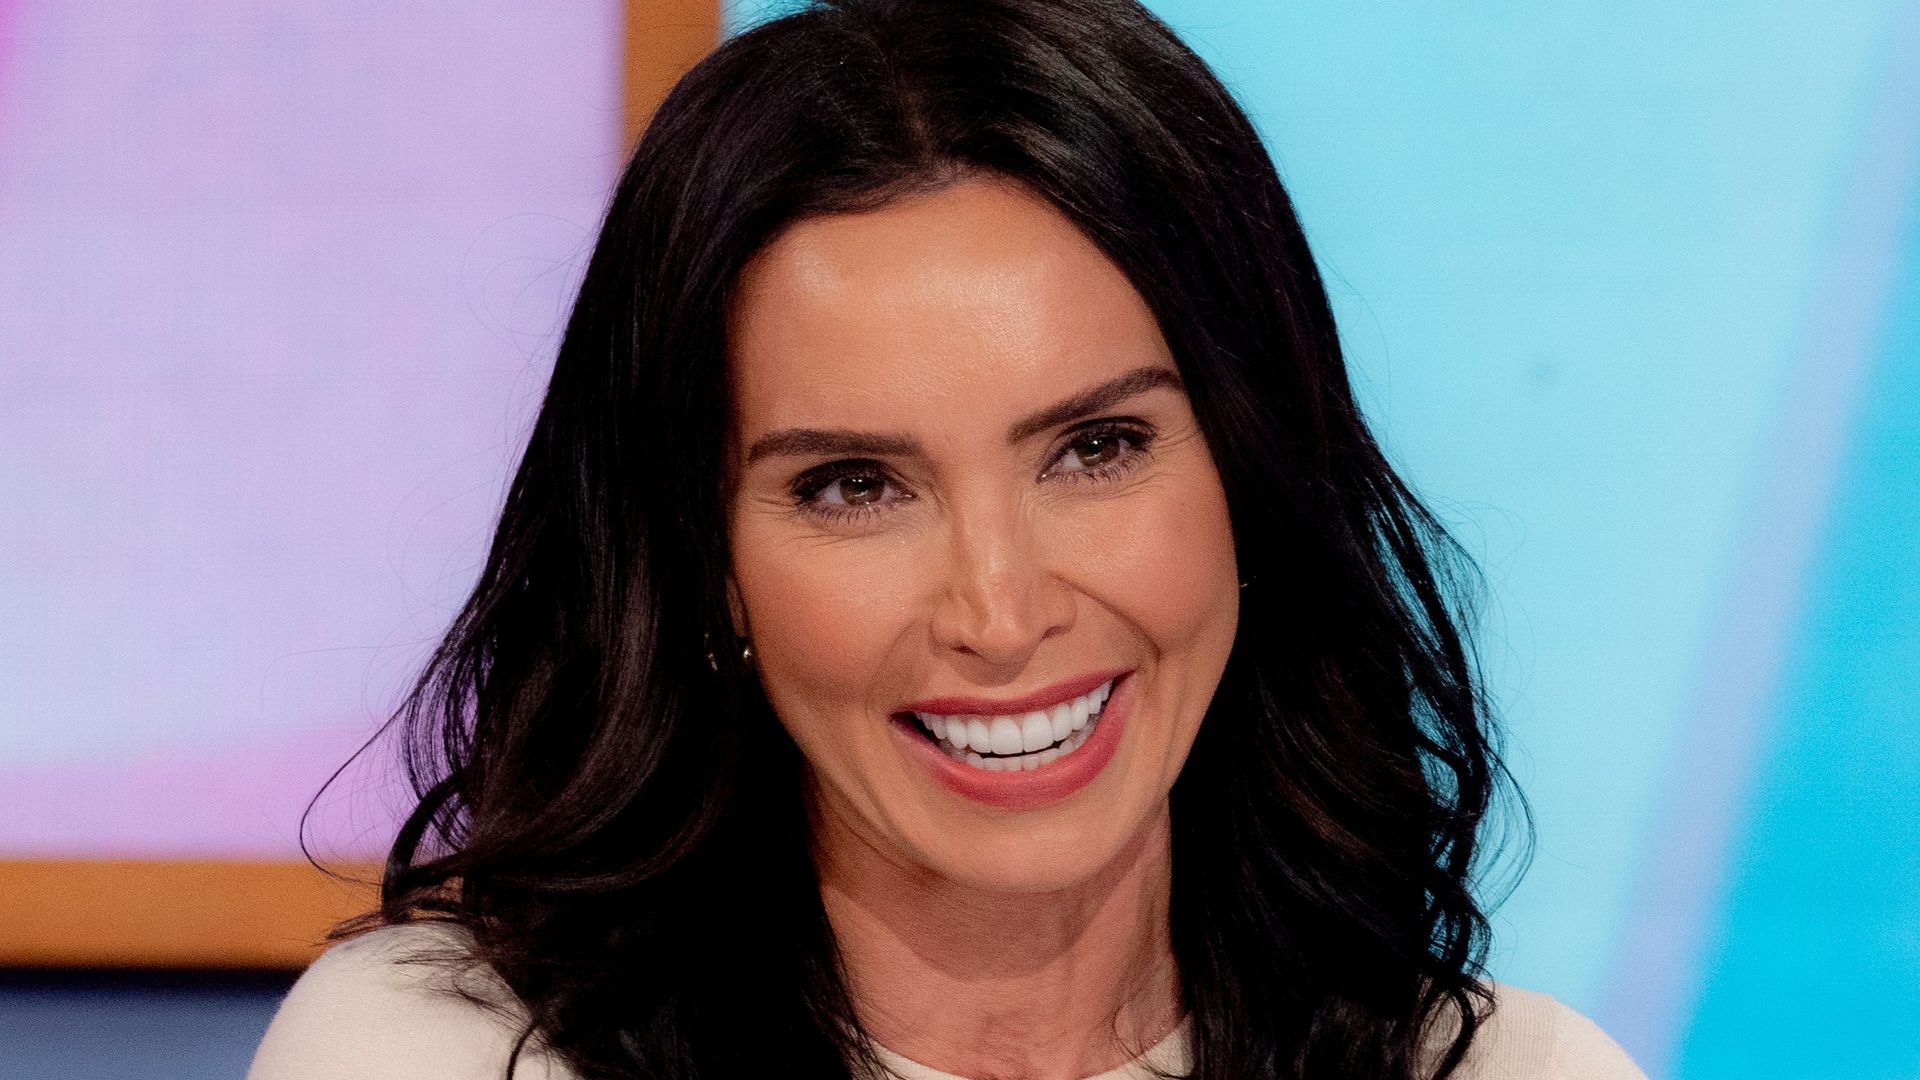 Christine Lampard on Loose Women wearing beige top and pink lipstick